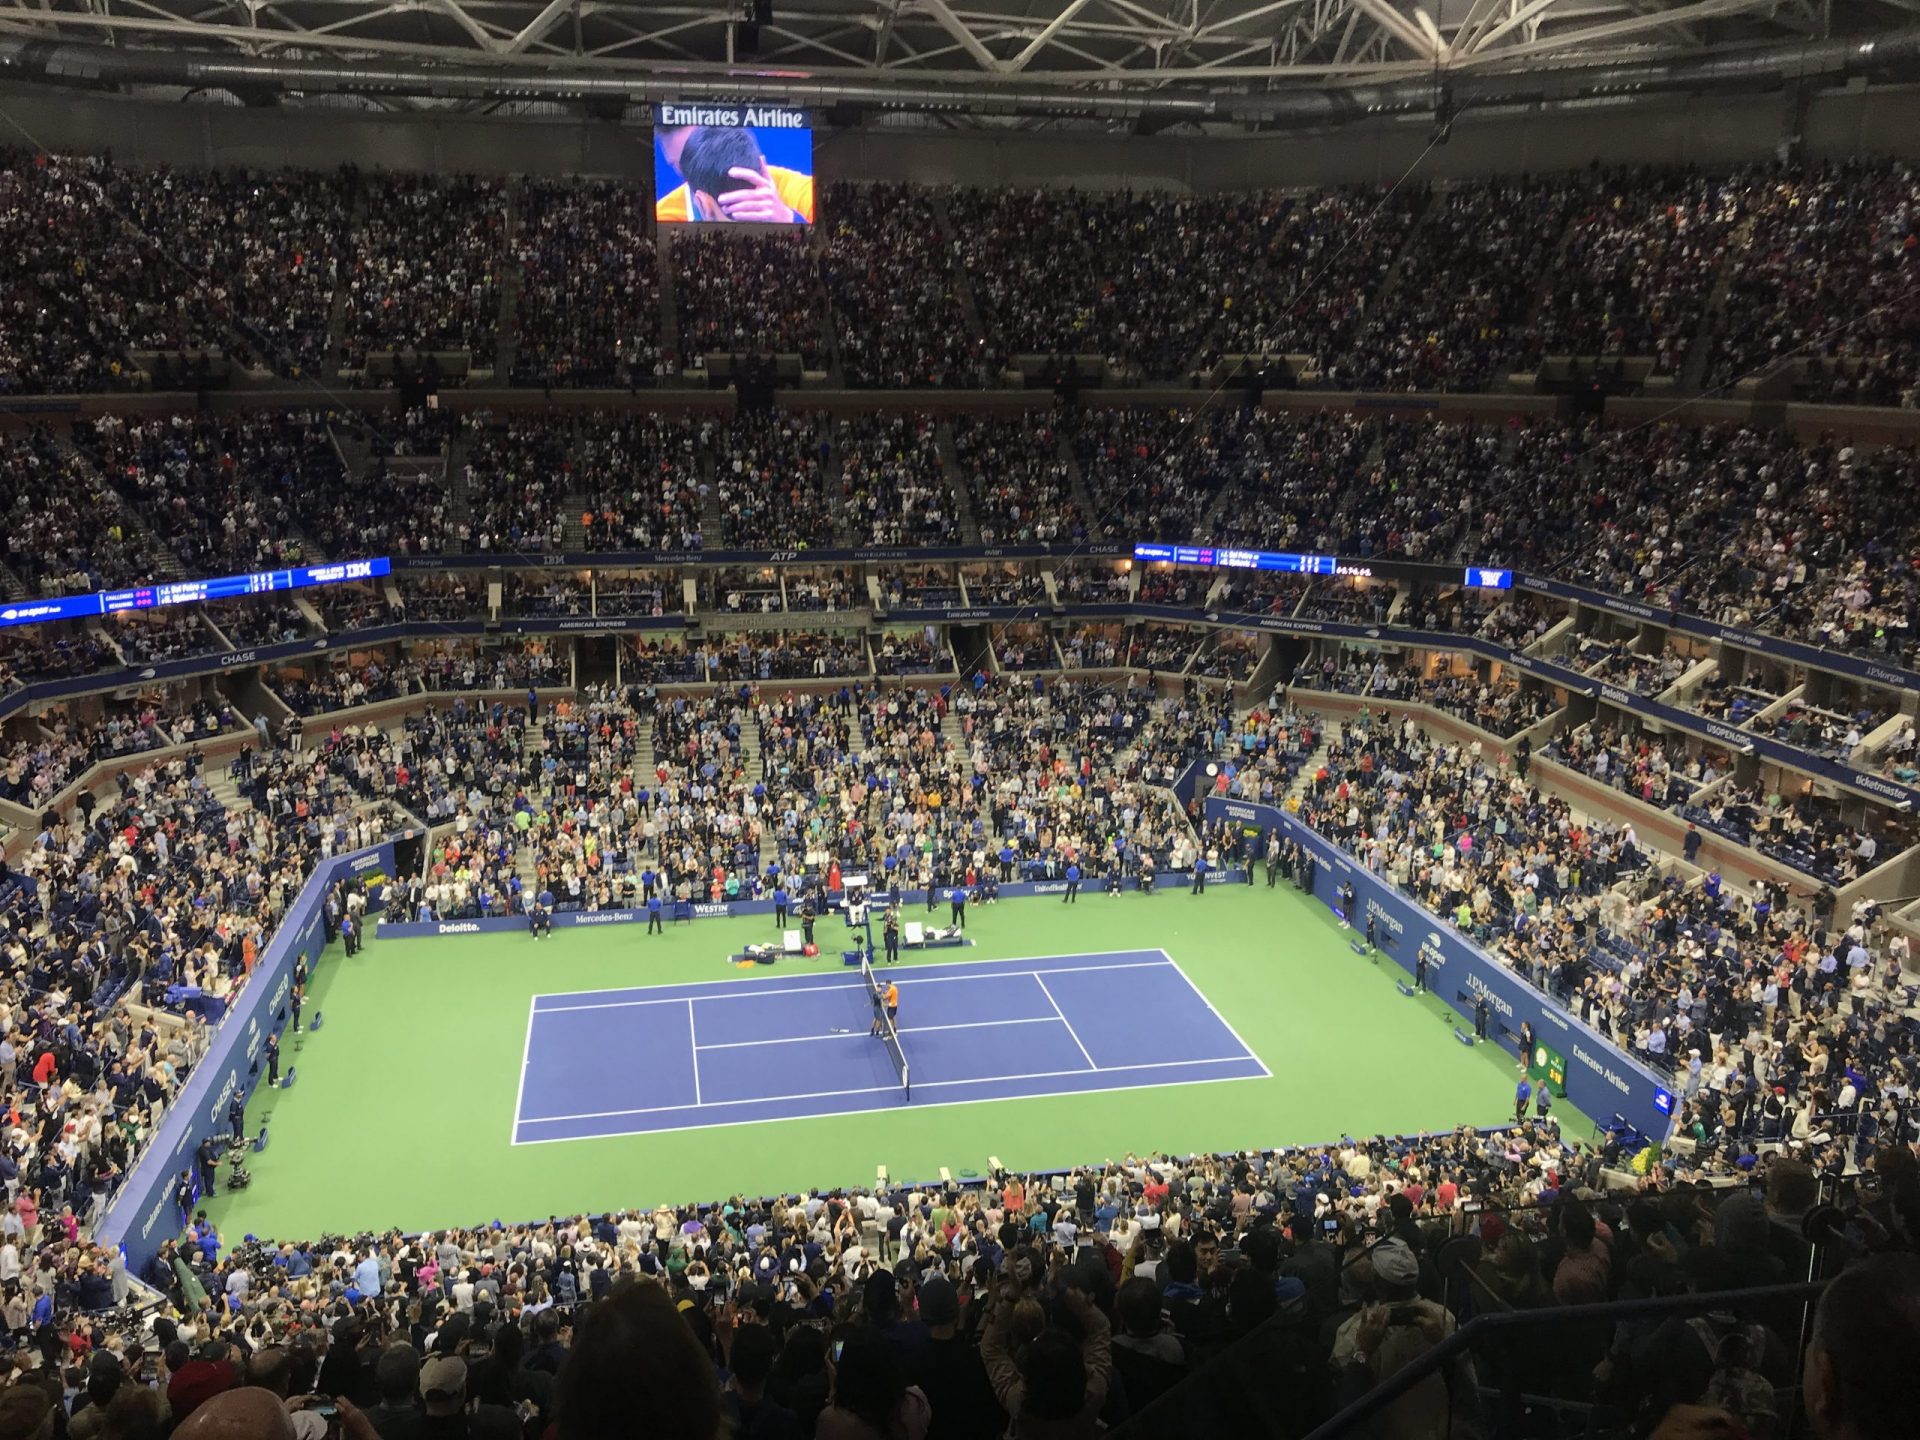 2018 us open final novak djokovic champion scaled - I Won a Travel Contest & Attended the U.S. Open Final